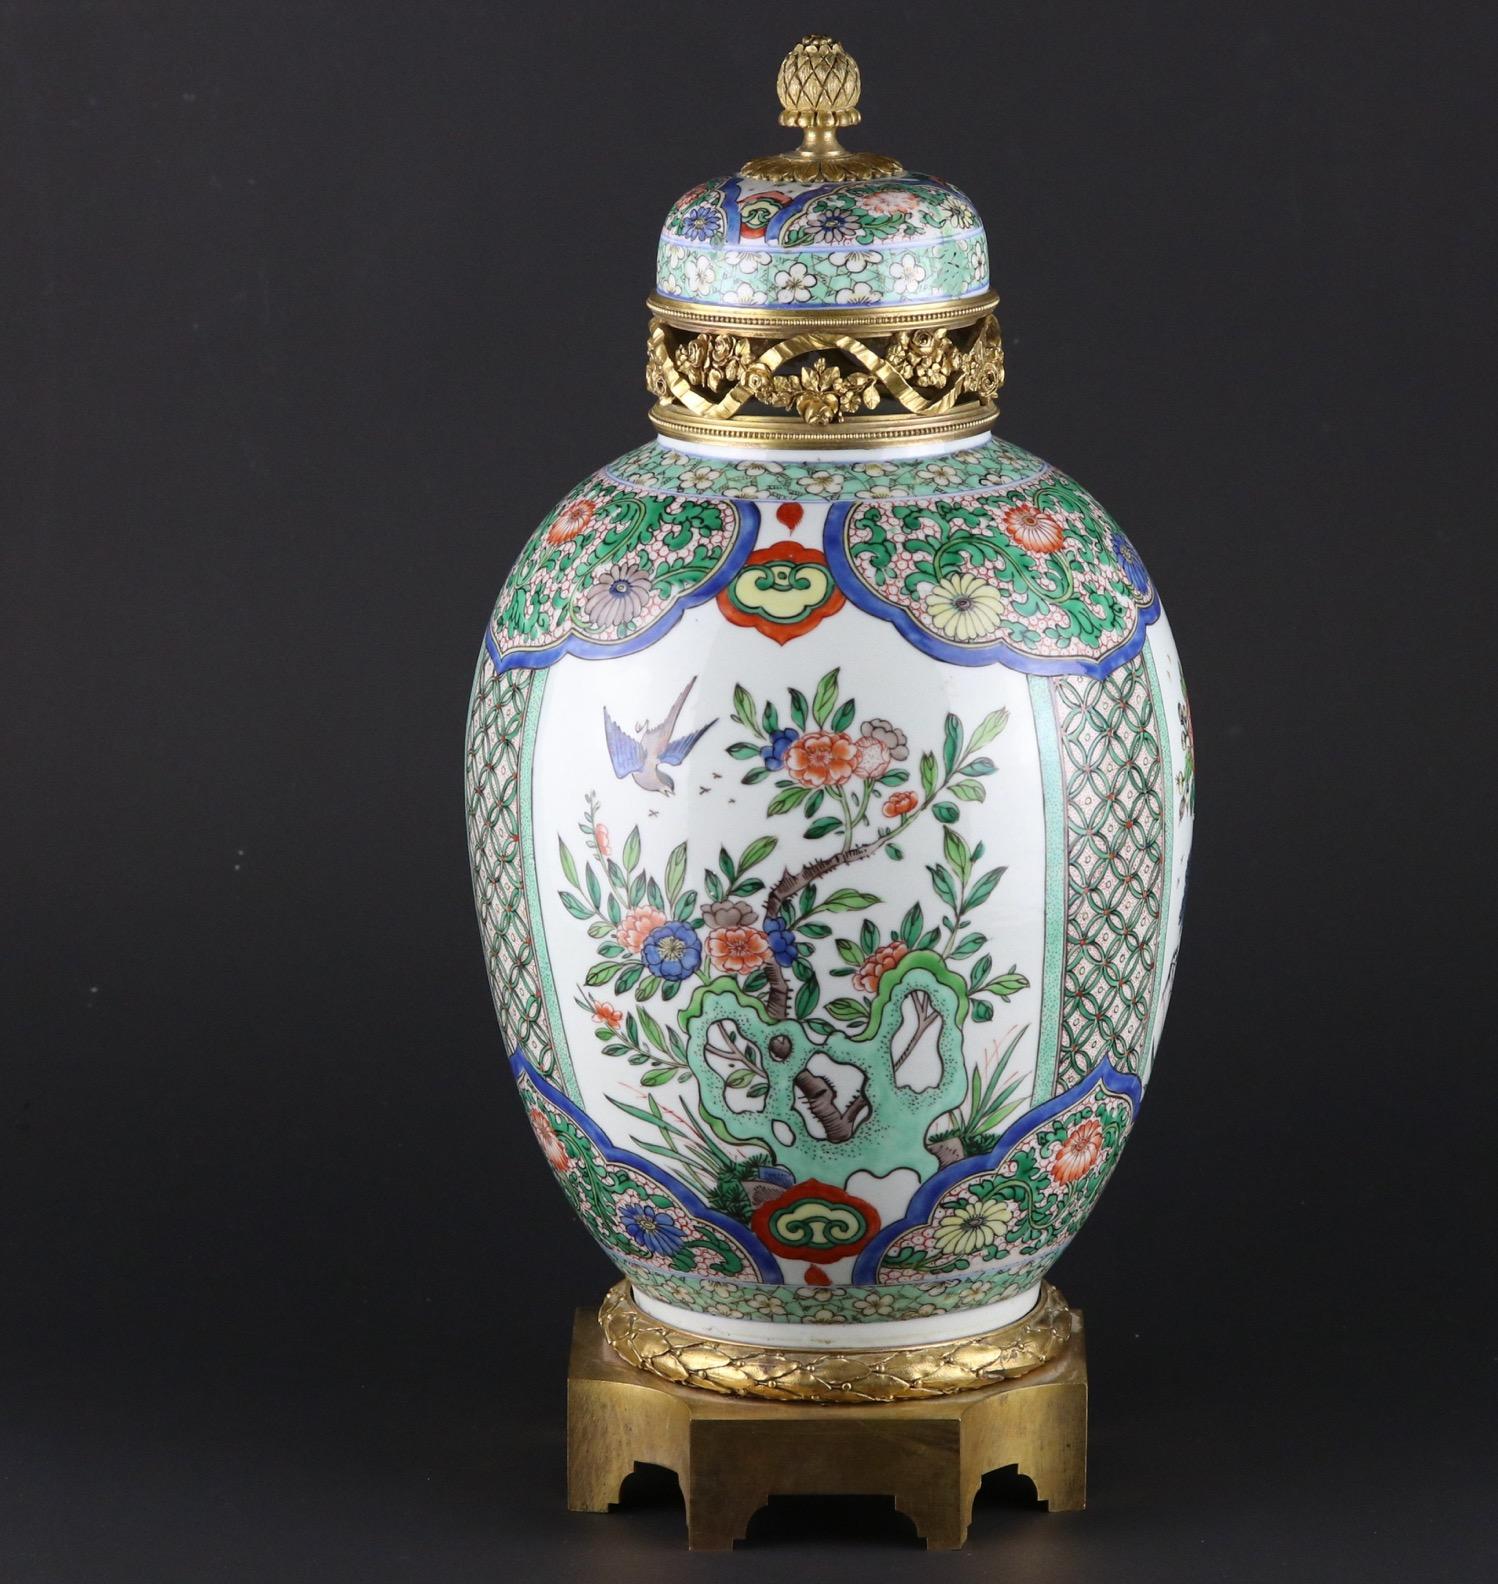 A Louis XVI style gilt bronze mounted French Samson porcelain vase modeled and decorated in the Chinese Kangxi and famille verte style, Paris, last quarter of the 19th century. Signed by Samson on the bottom. Lid restored and bottom drilled for